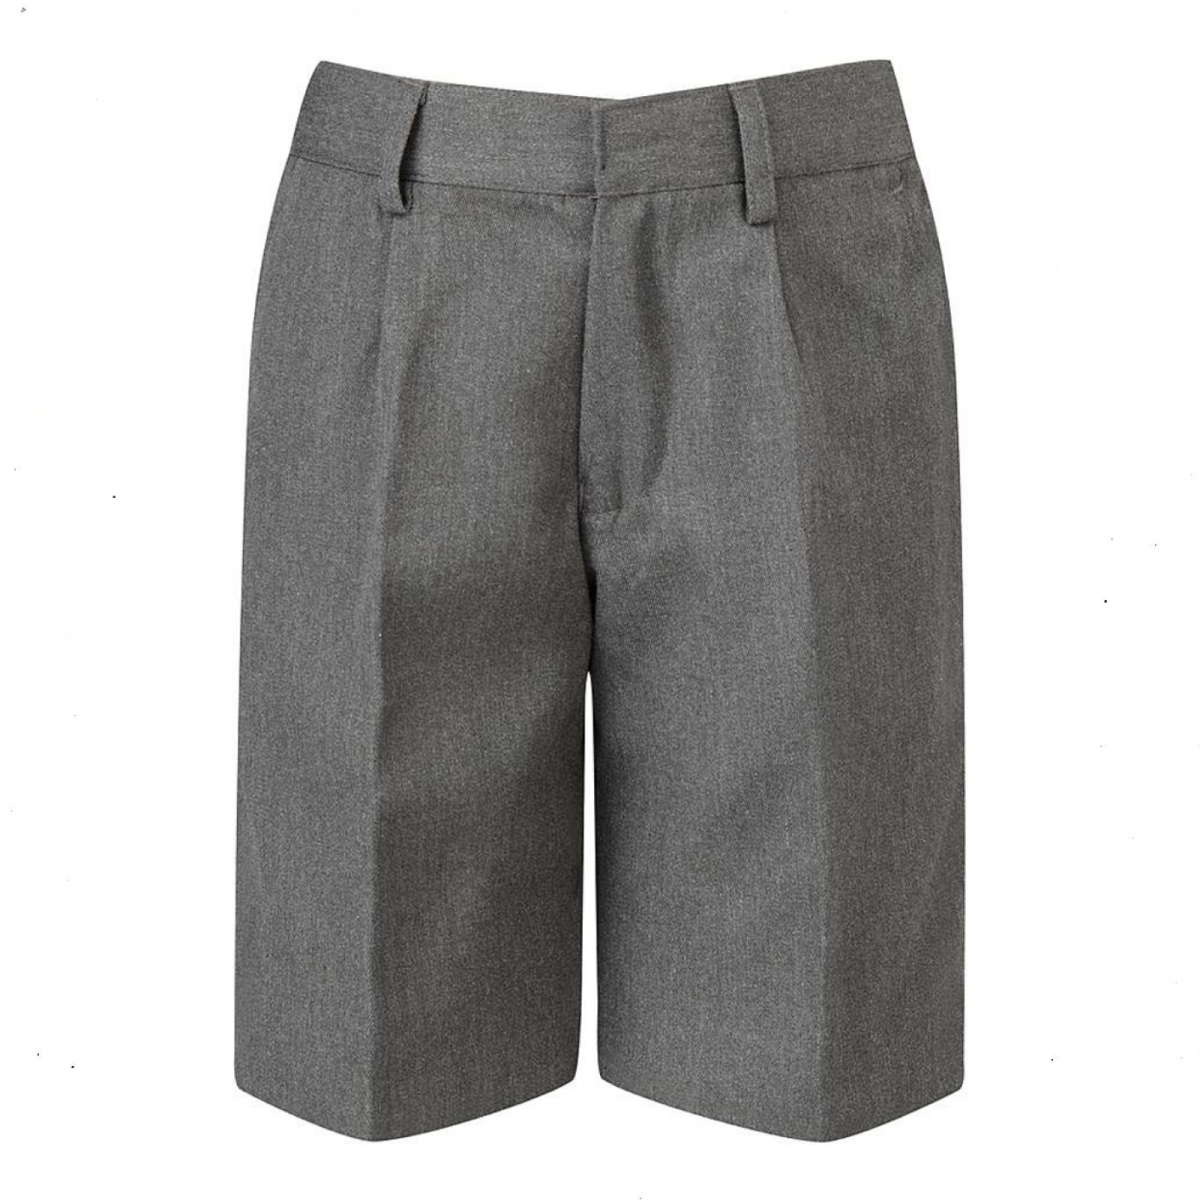 Boy's Grey Shorts | Forsters School Outfitters Ltd